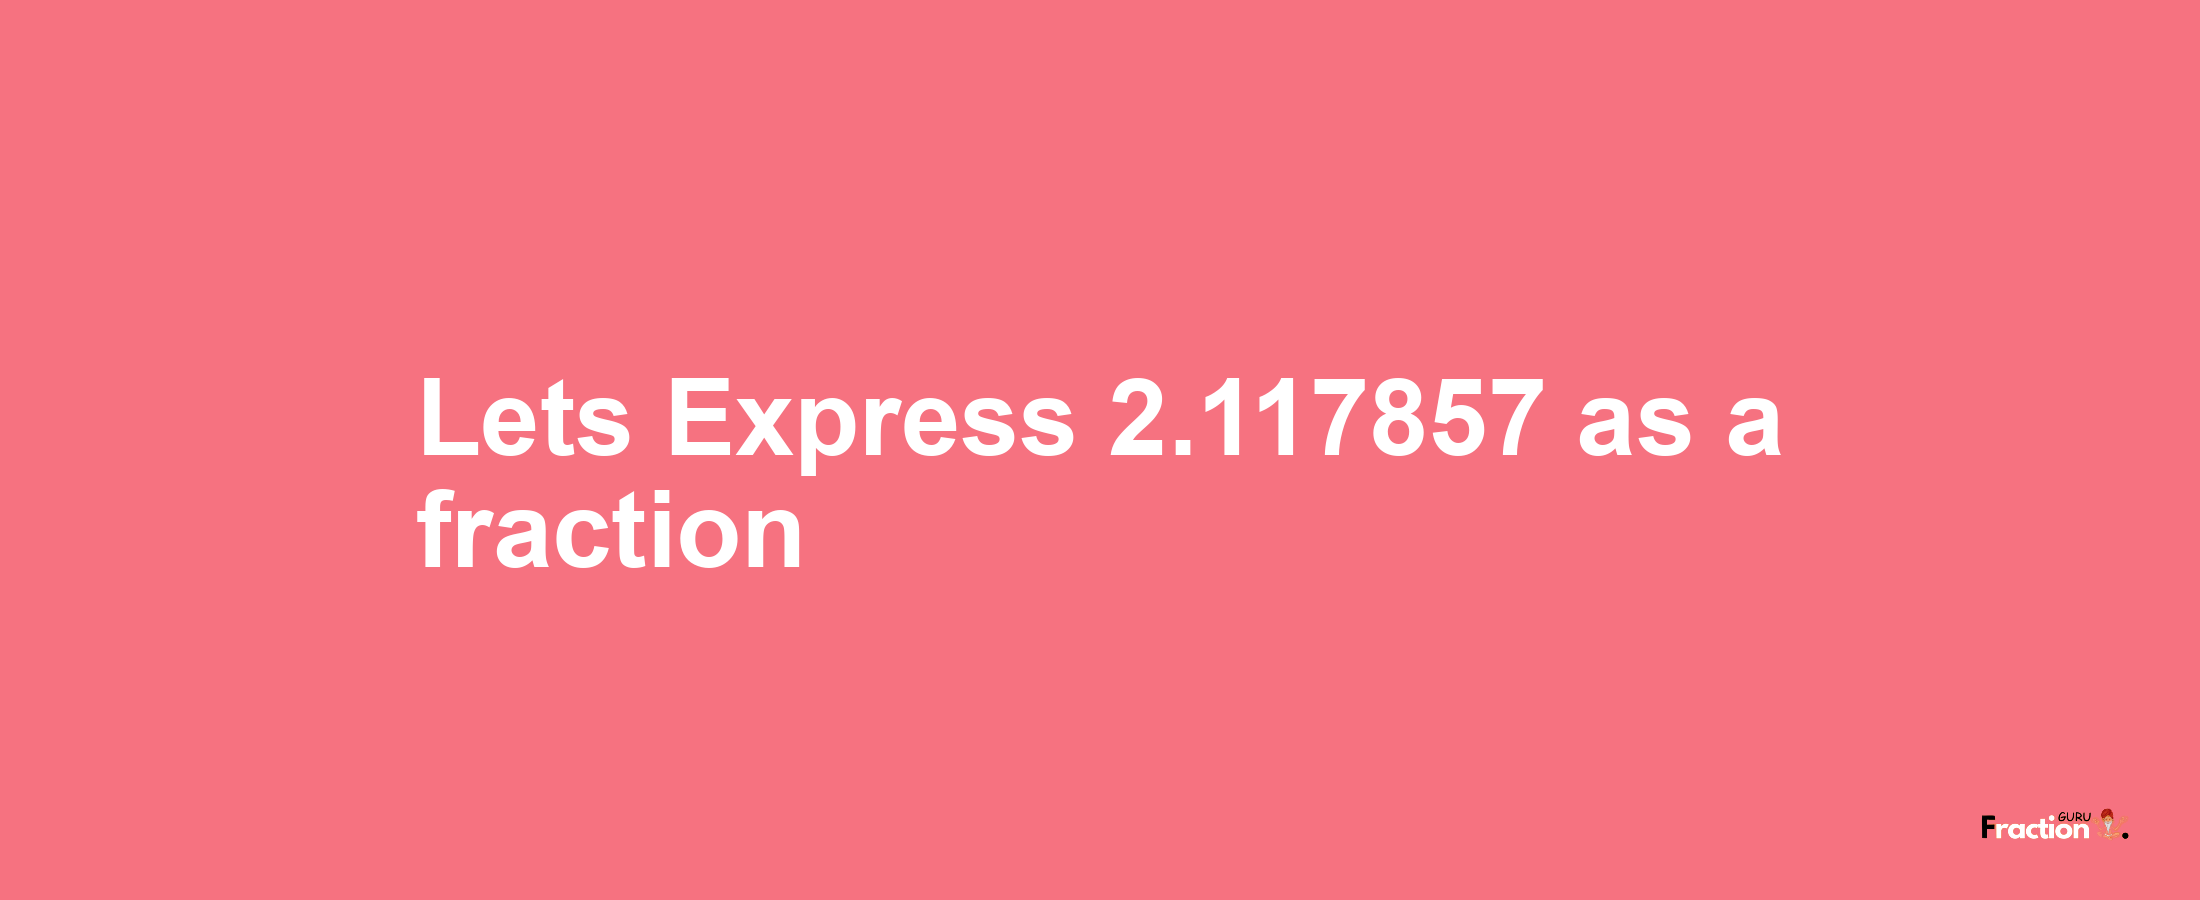 Lets Express 2.117857 as afraction